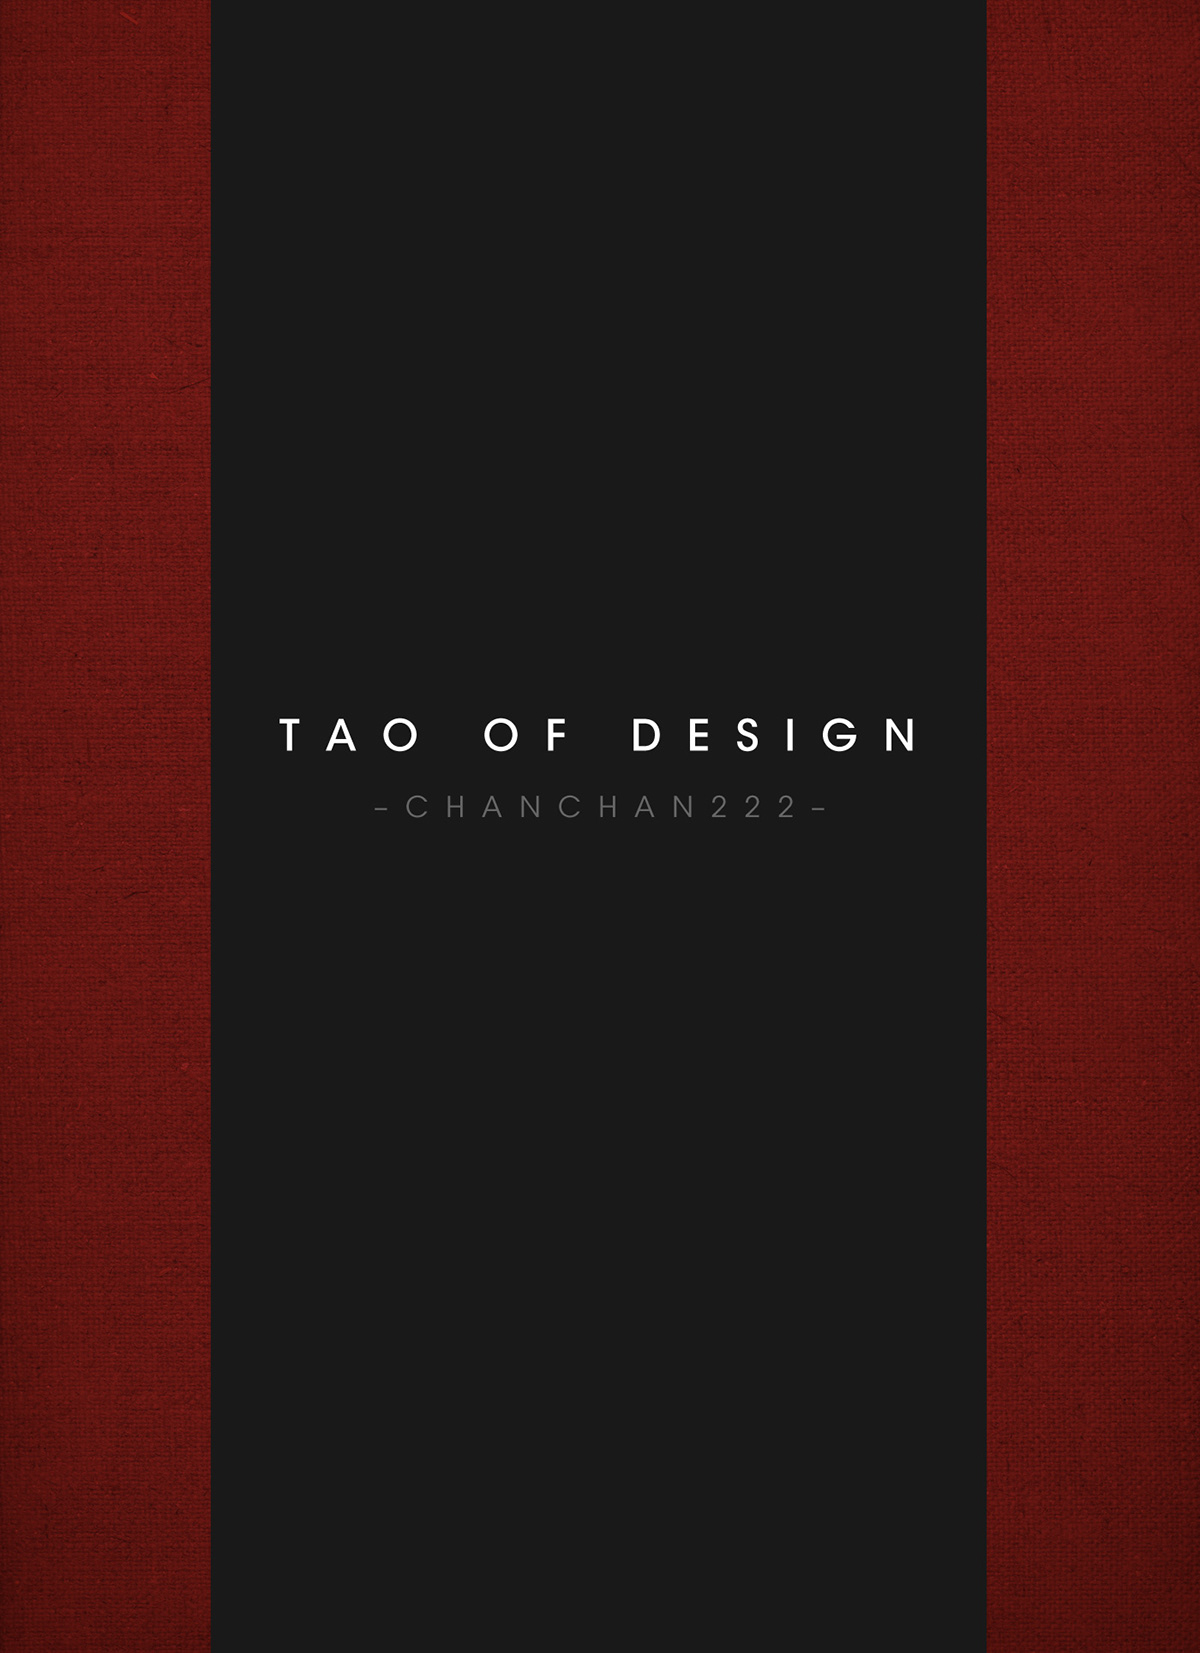 philosophy   Quotes   chanchan222 Laws of Design Tao of Design